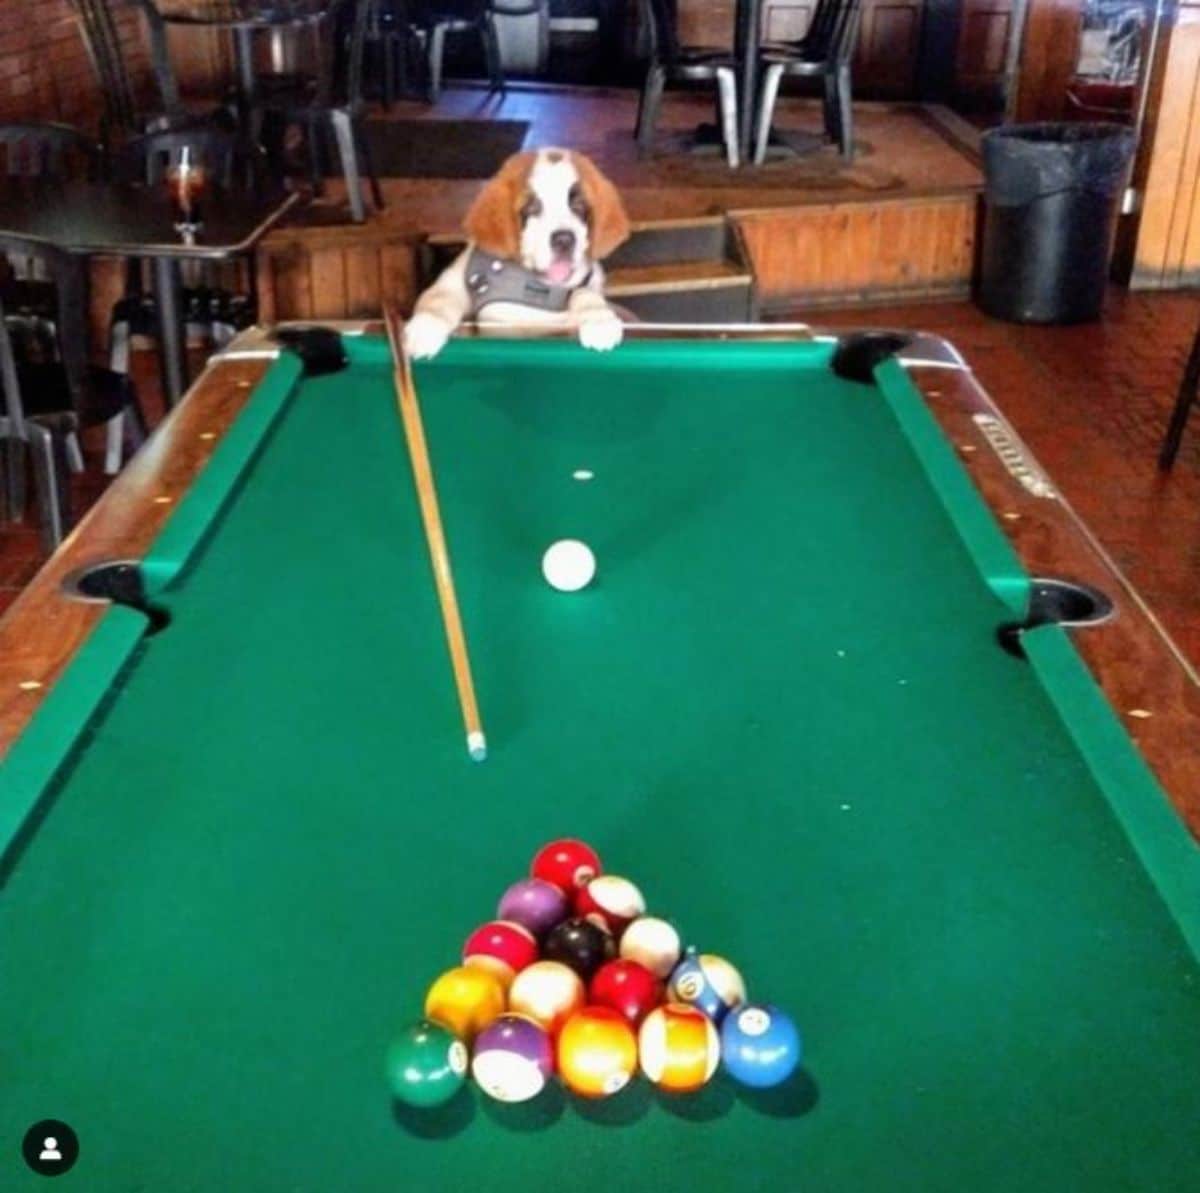 brown and white puppy standing on hind legs at a reen pool table next to a pool cue